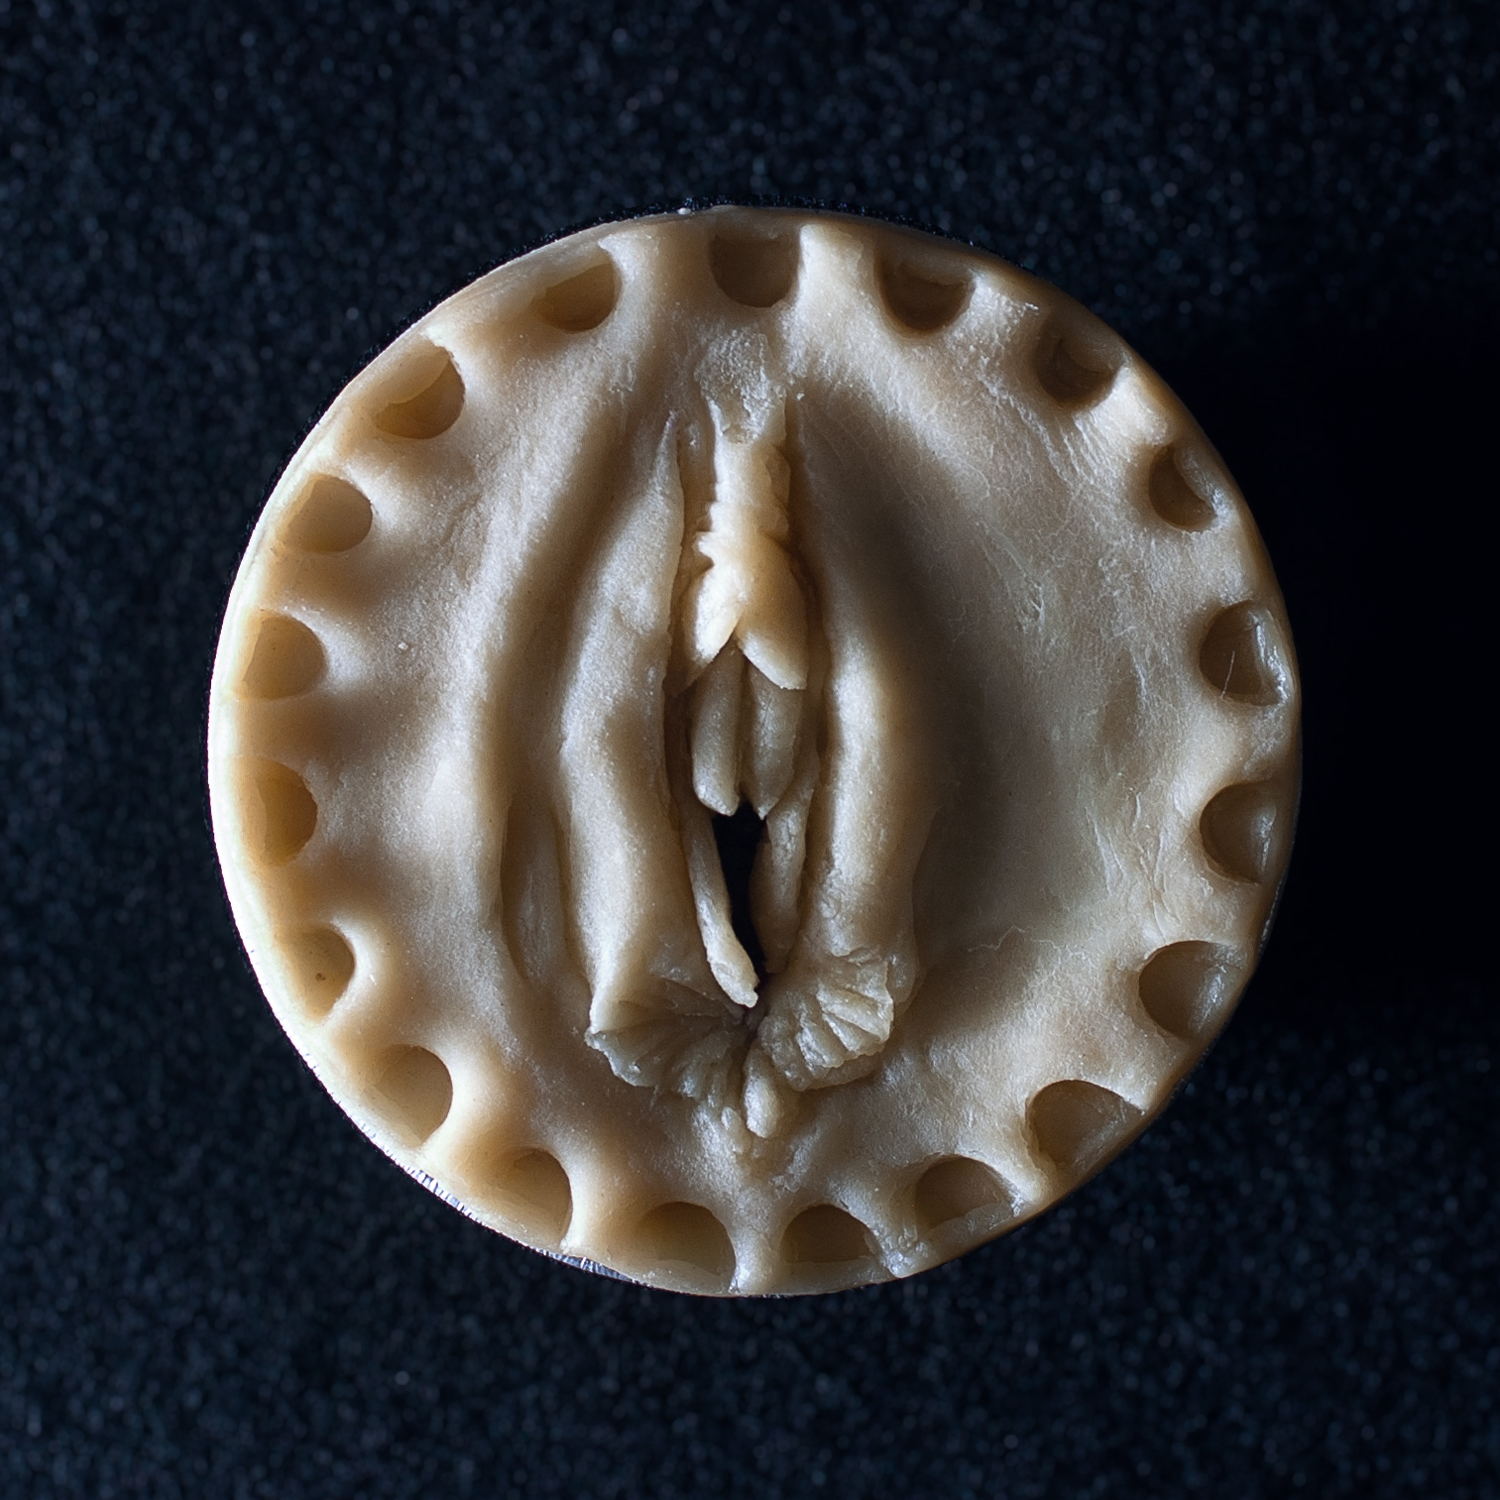 Pie 8, a pie sculpted to appear like a vulva